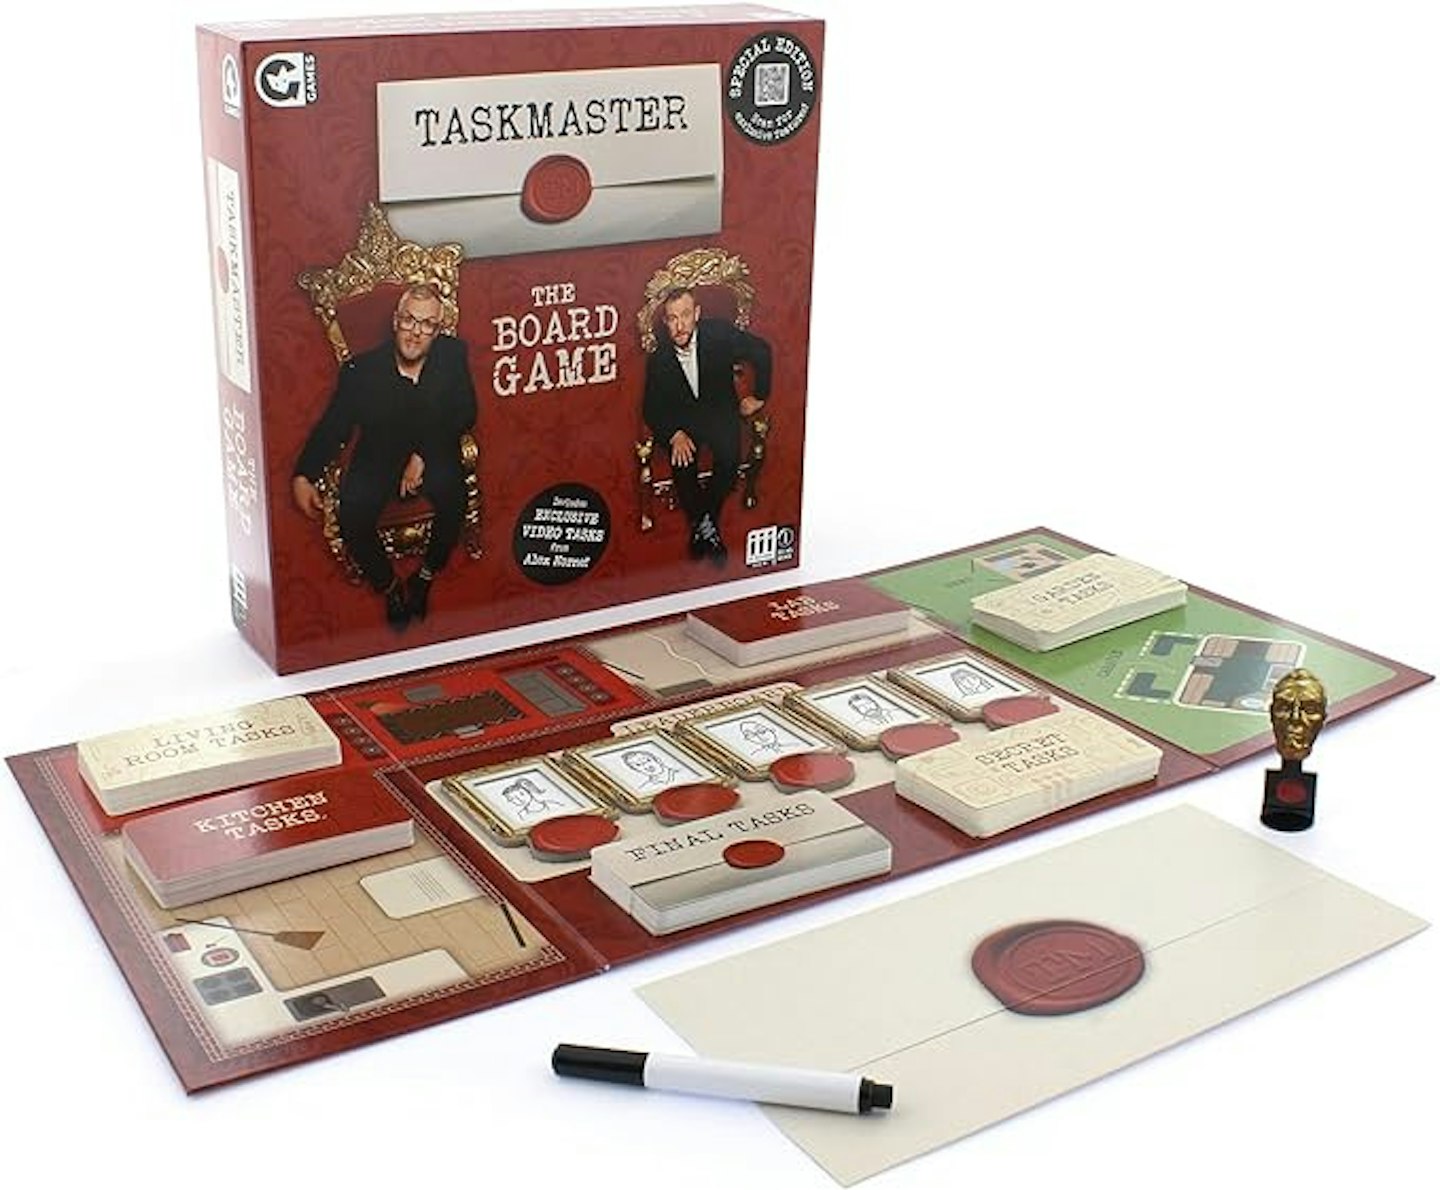 Taskmaster board game box and contents